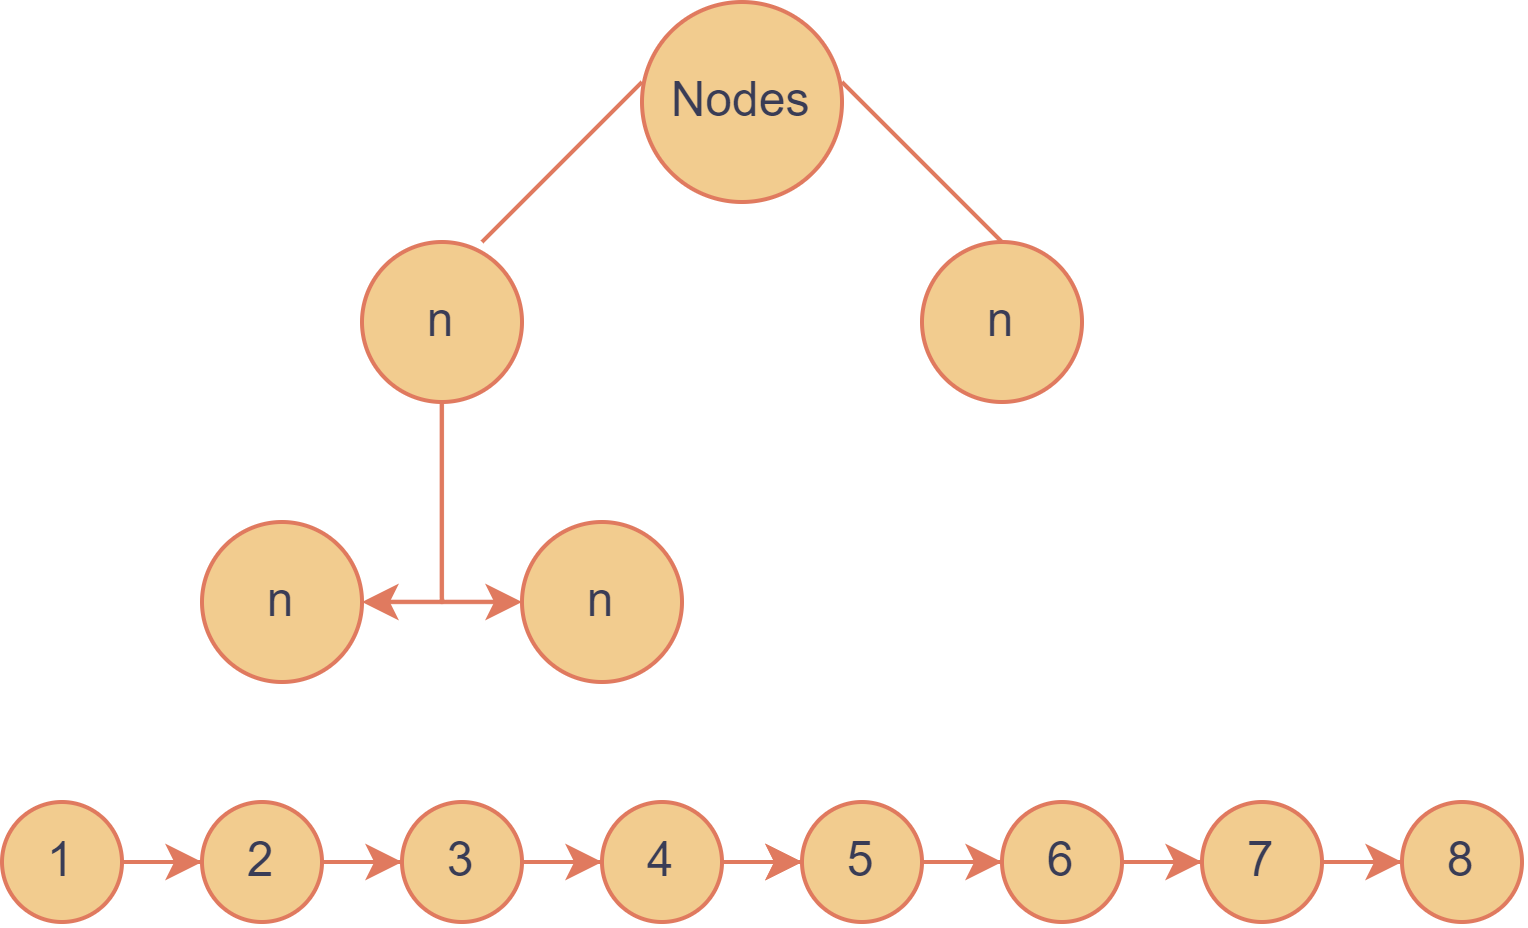 Sort Manual Linked List With Bubble Sort Algorithm in Java